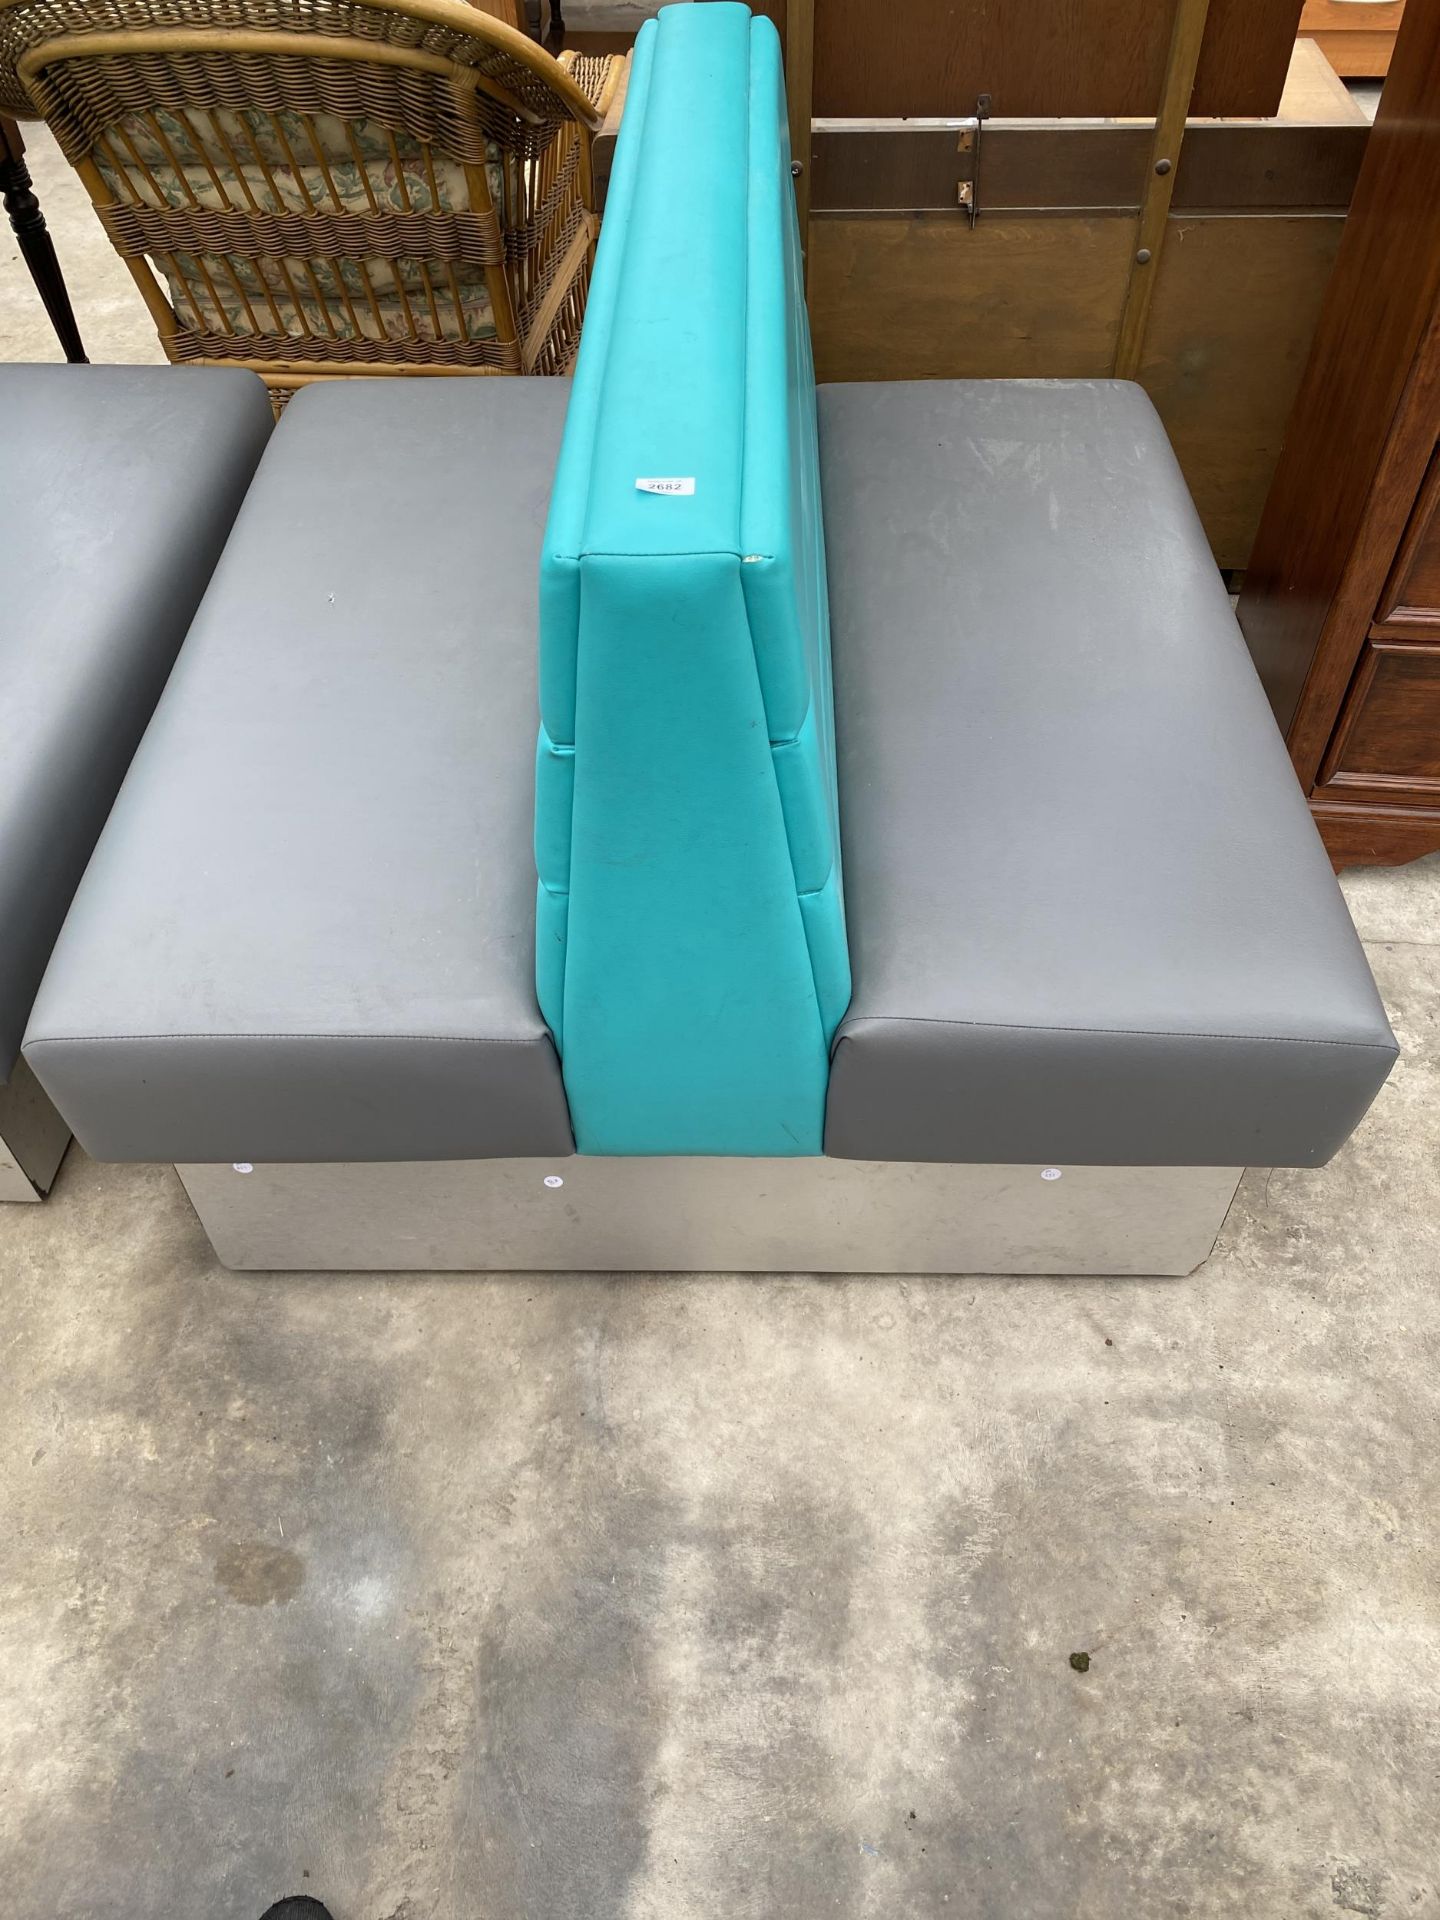 A MODERN DOUBLE SIDED BOOTH SEATING IN TURQUOISE AND GREY - Image 3 of 3